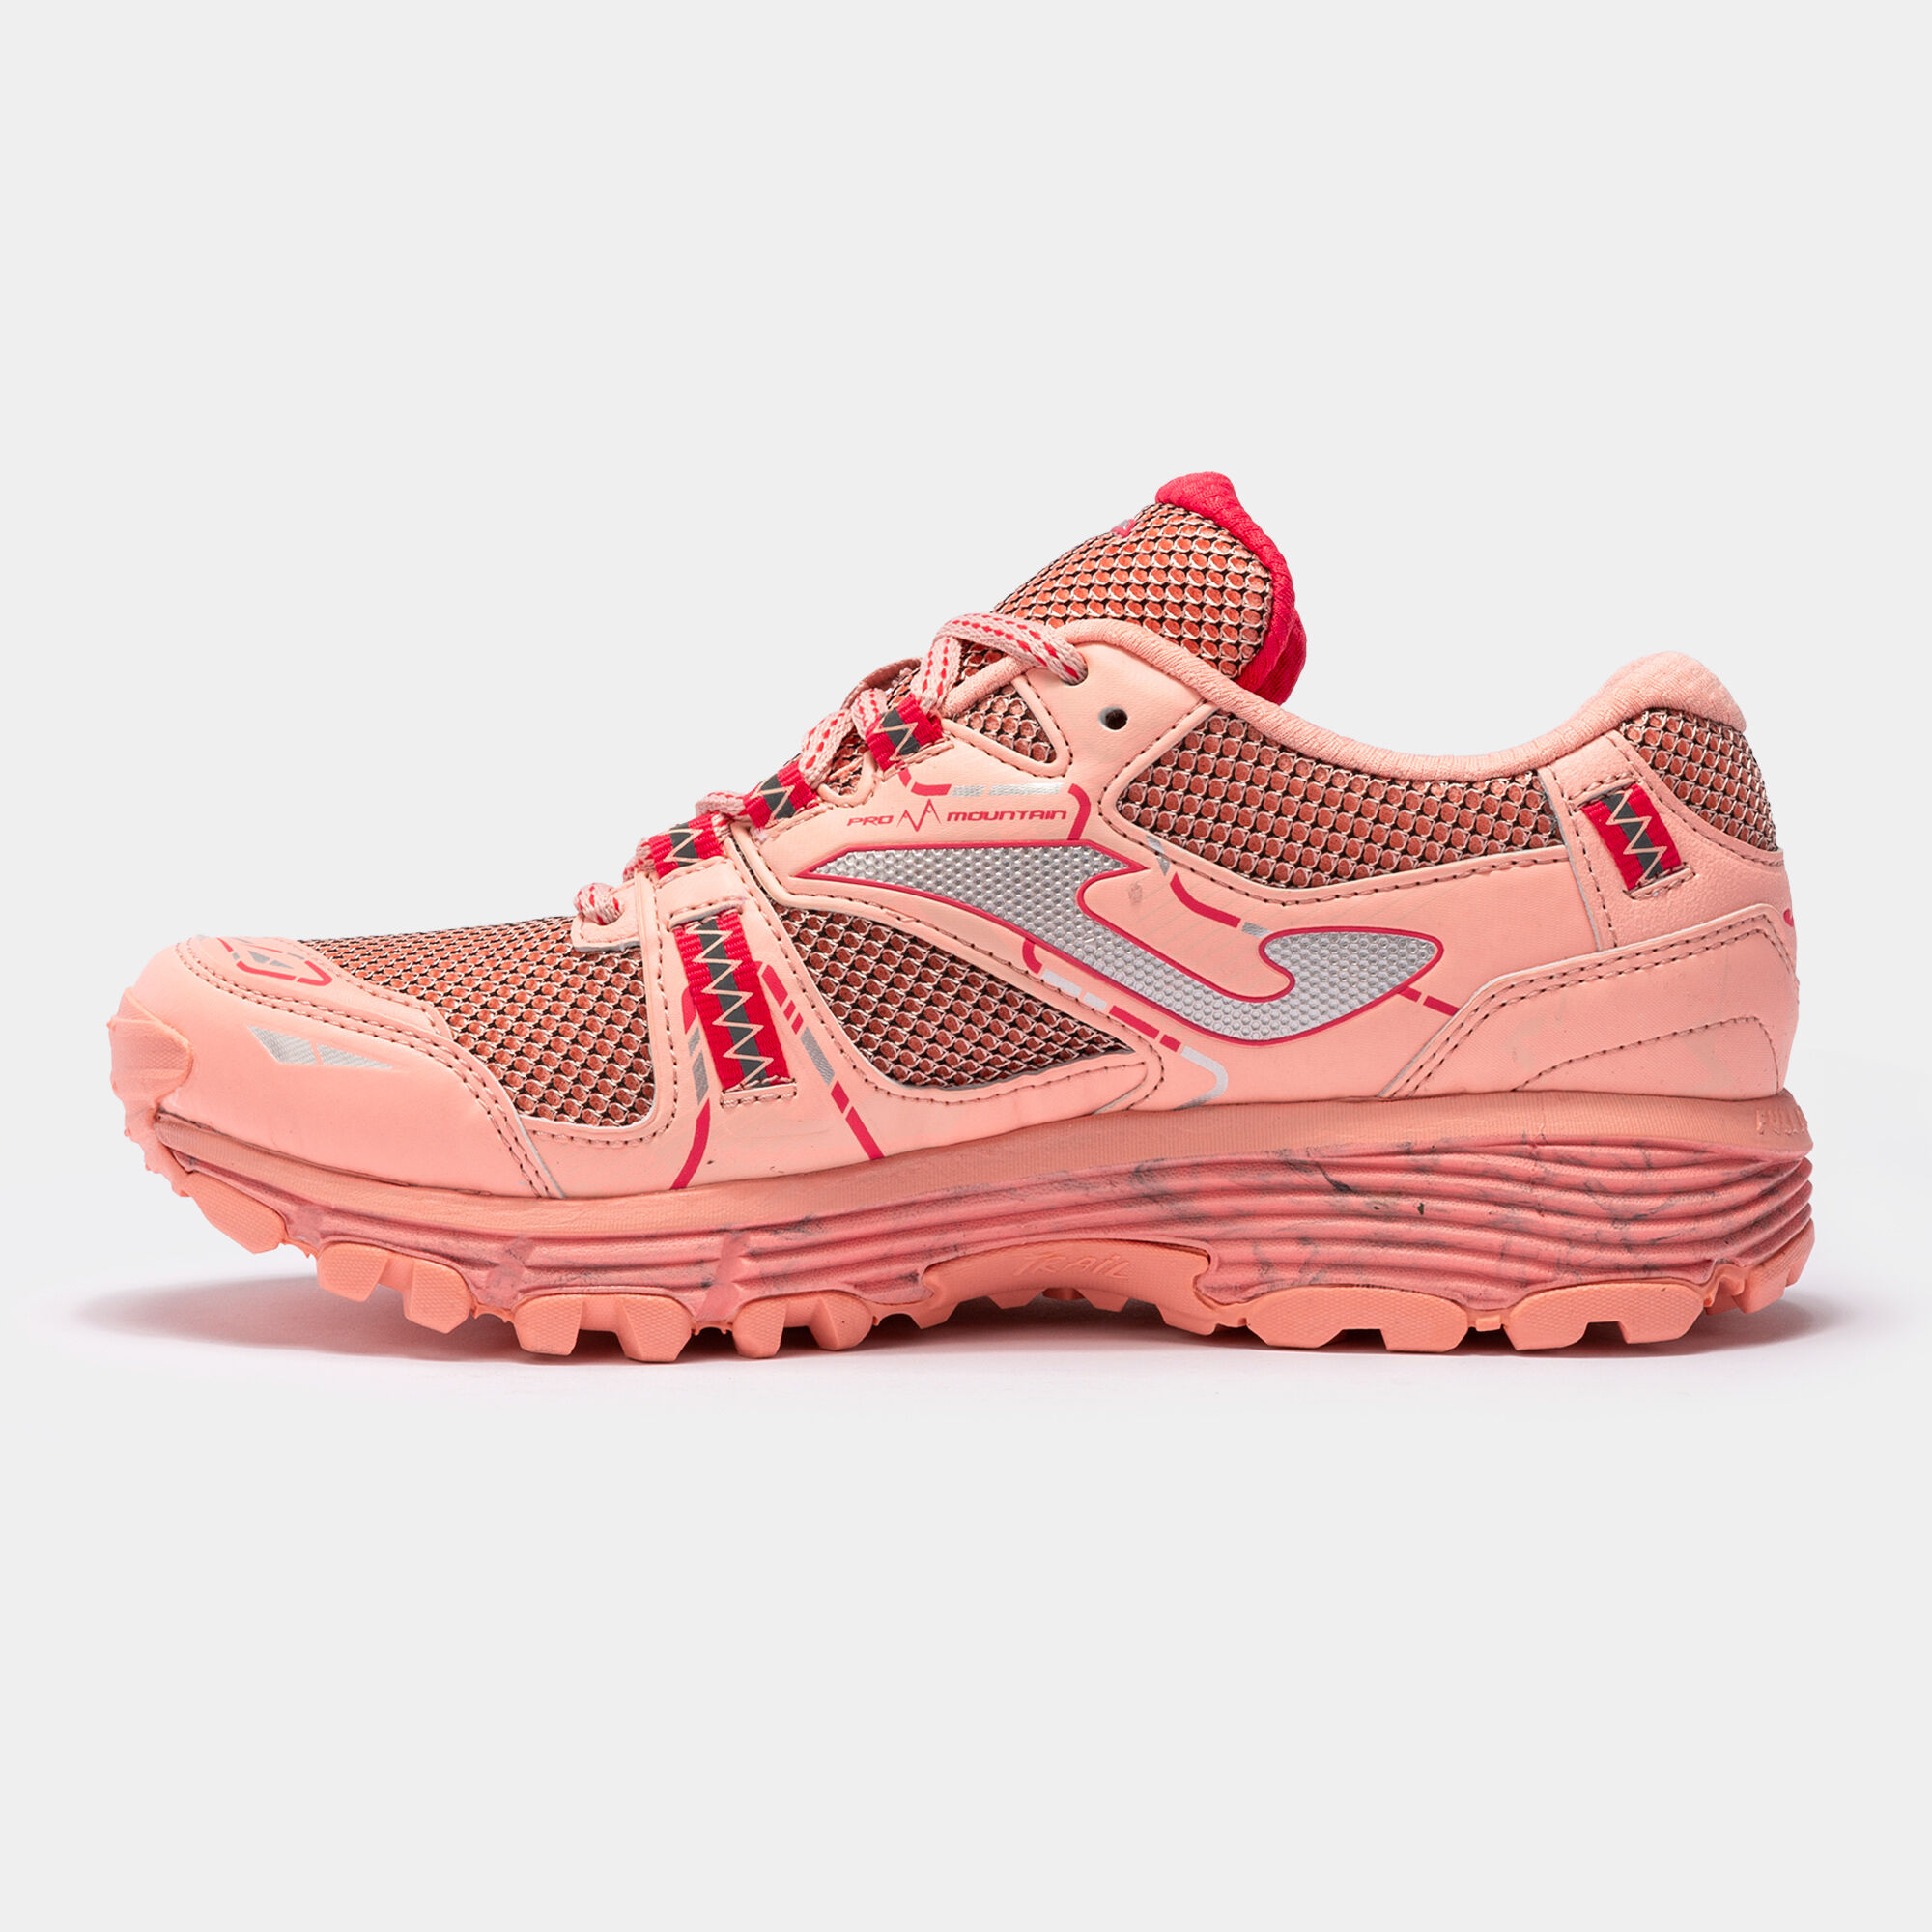 CHAUSSURES TRAIL RUNNING SHOCK 22 FEMME ROSE GRIS